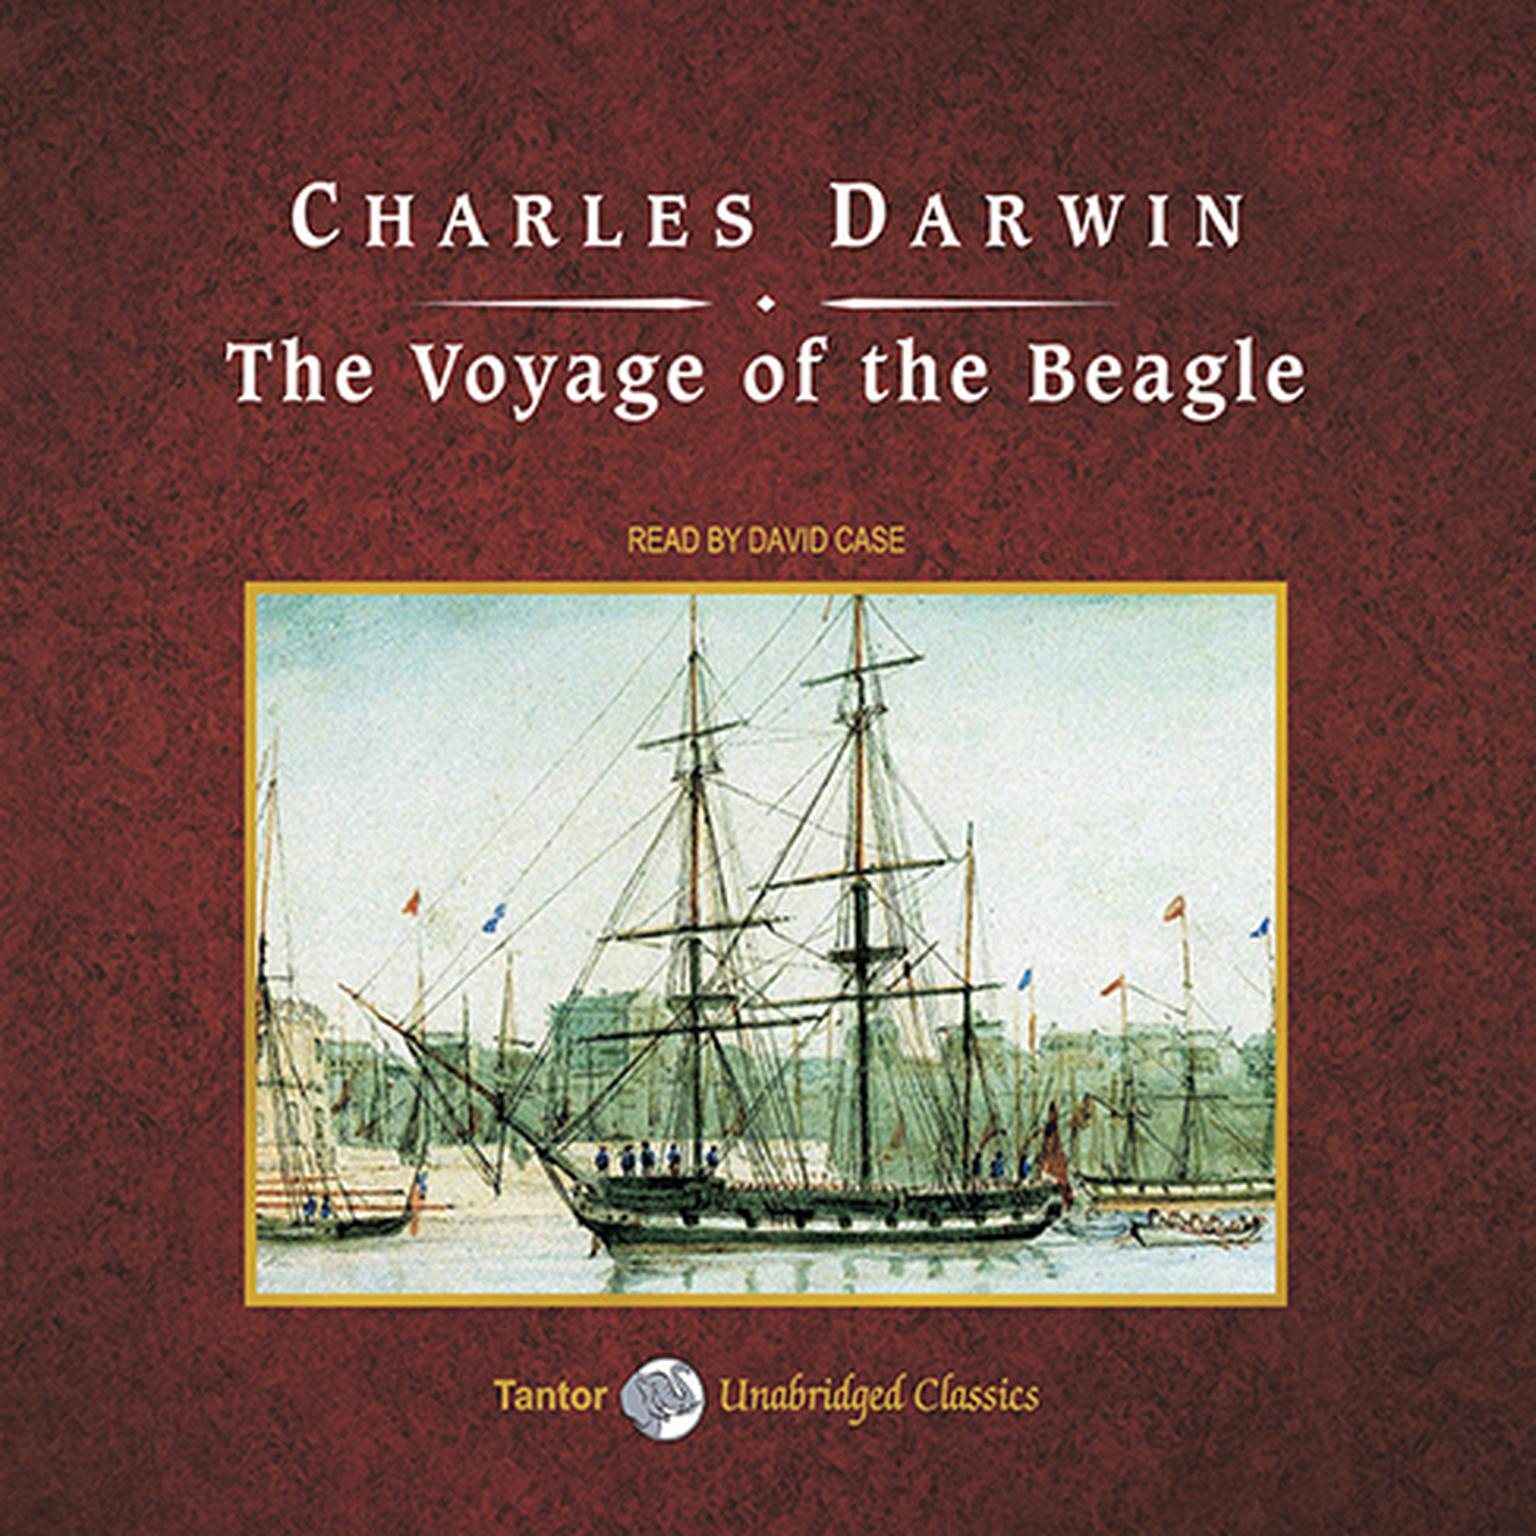 The Voyage of the Beagle, with eBook Audiobook, by Charles Darwin